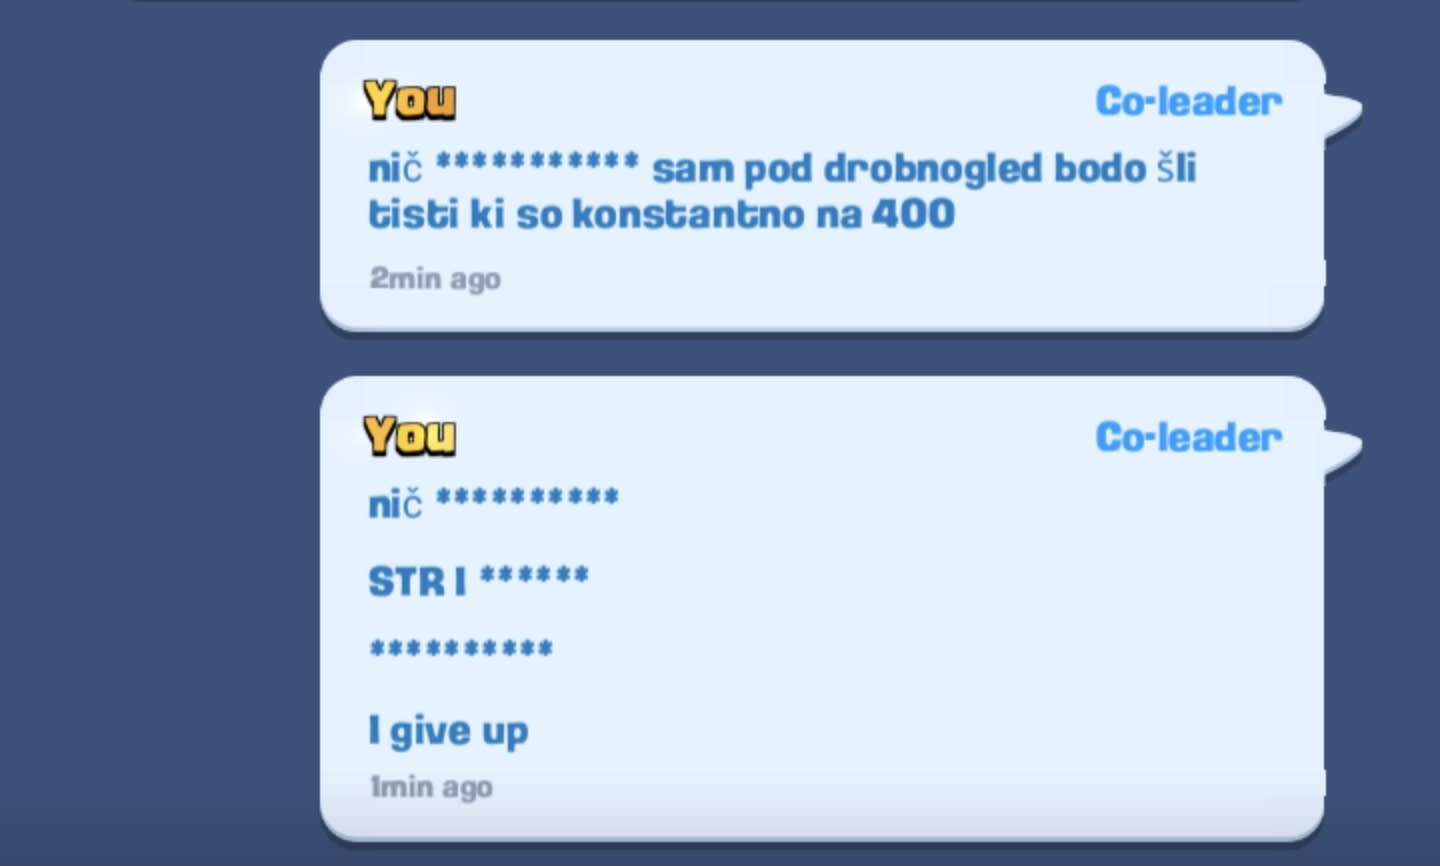 Discussing with your clanmates in a language other than English is very hindering. Supercell, please fix your word filter cause it's useless and downright annoying.